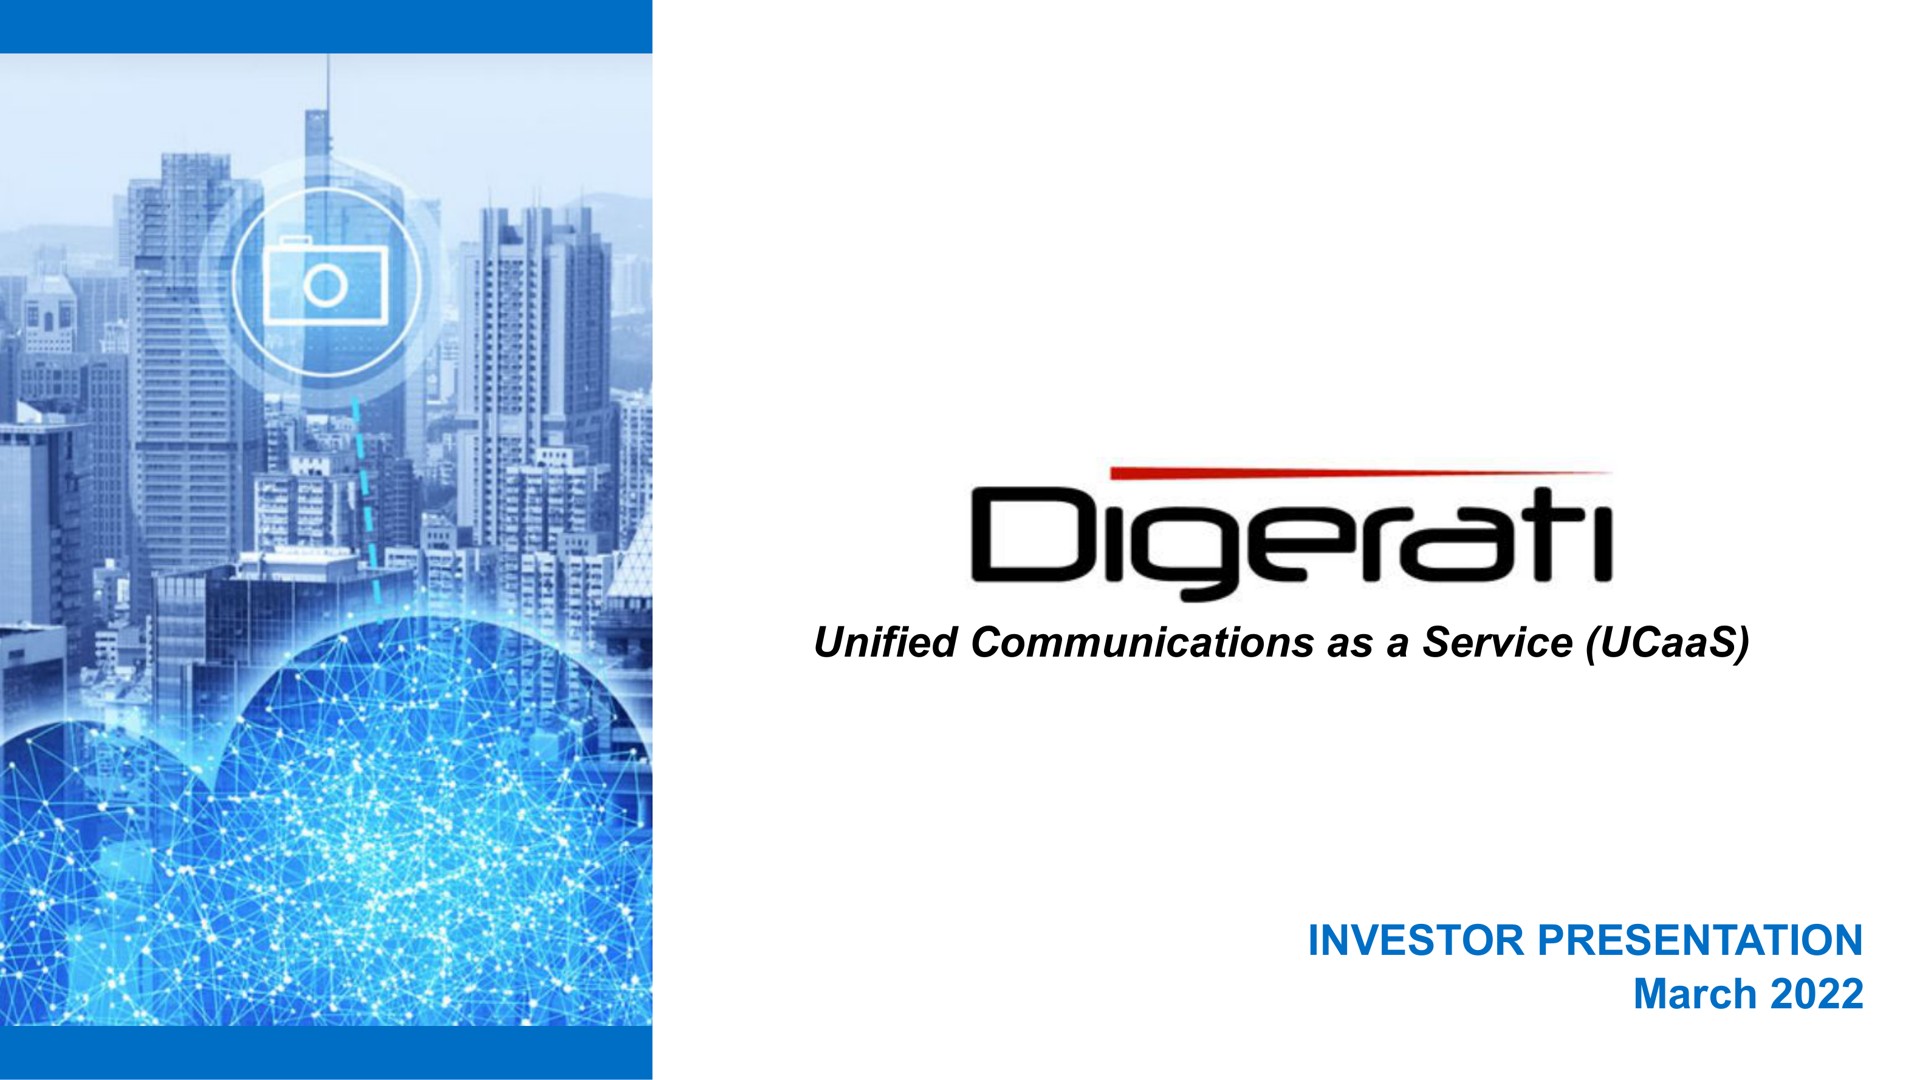 unified communications as a service investor presentation march | Digerati